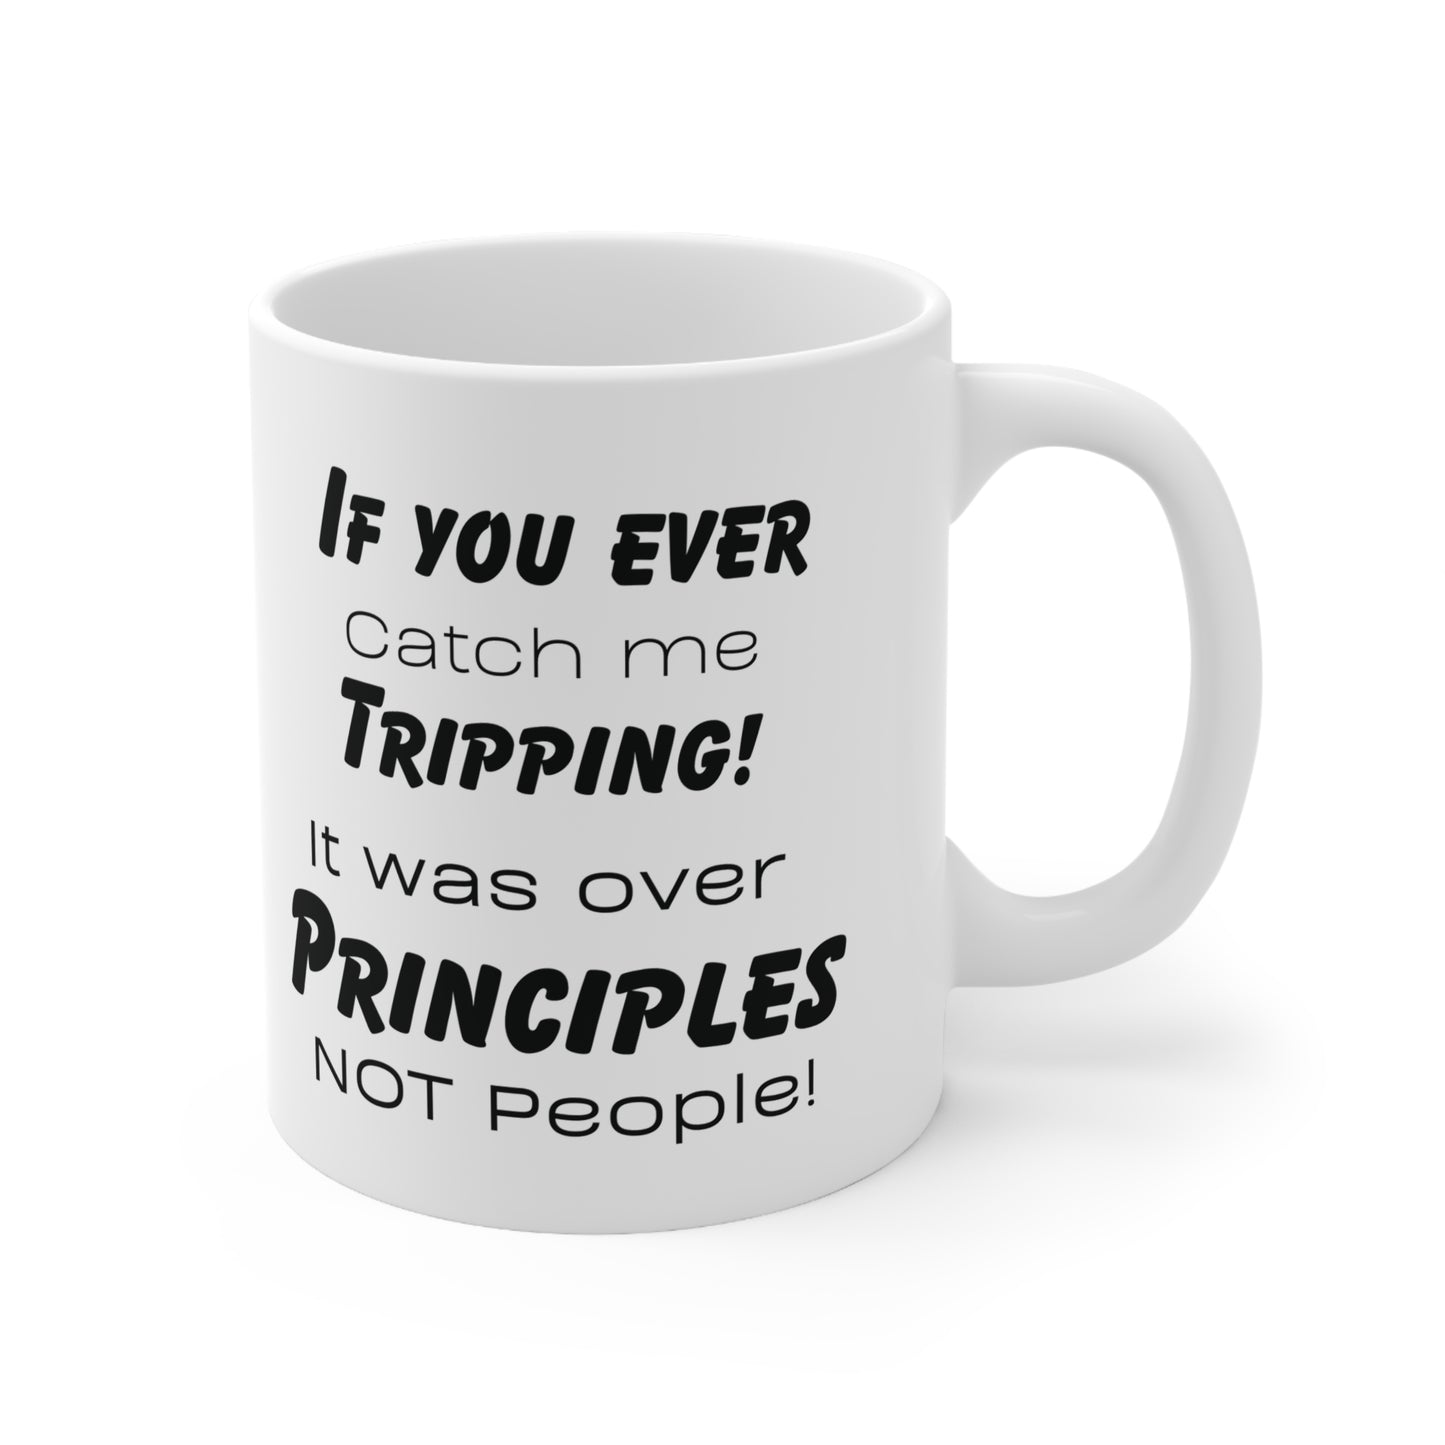 If you ever catch me tripping, its over the principles not the people! Ceramic Mug 11oz